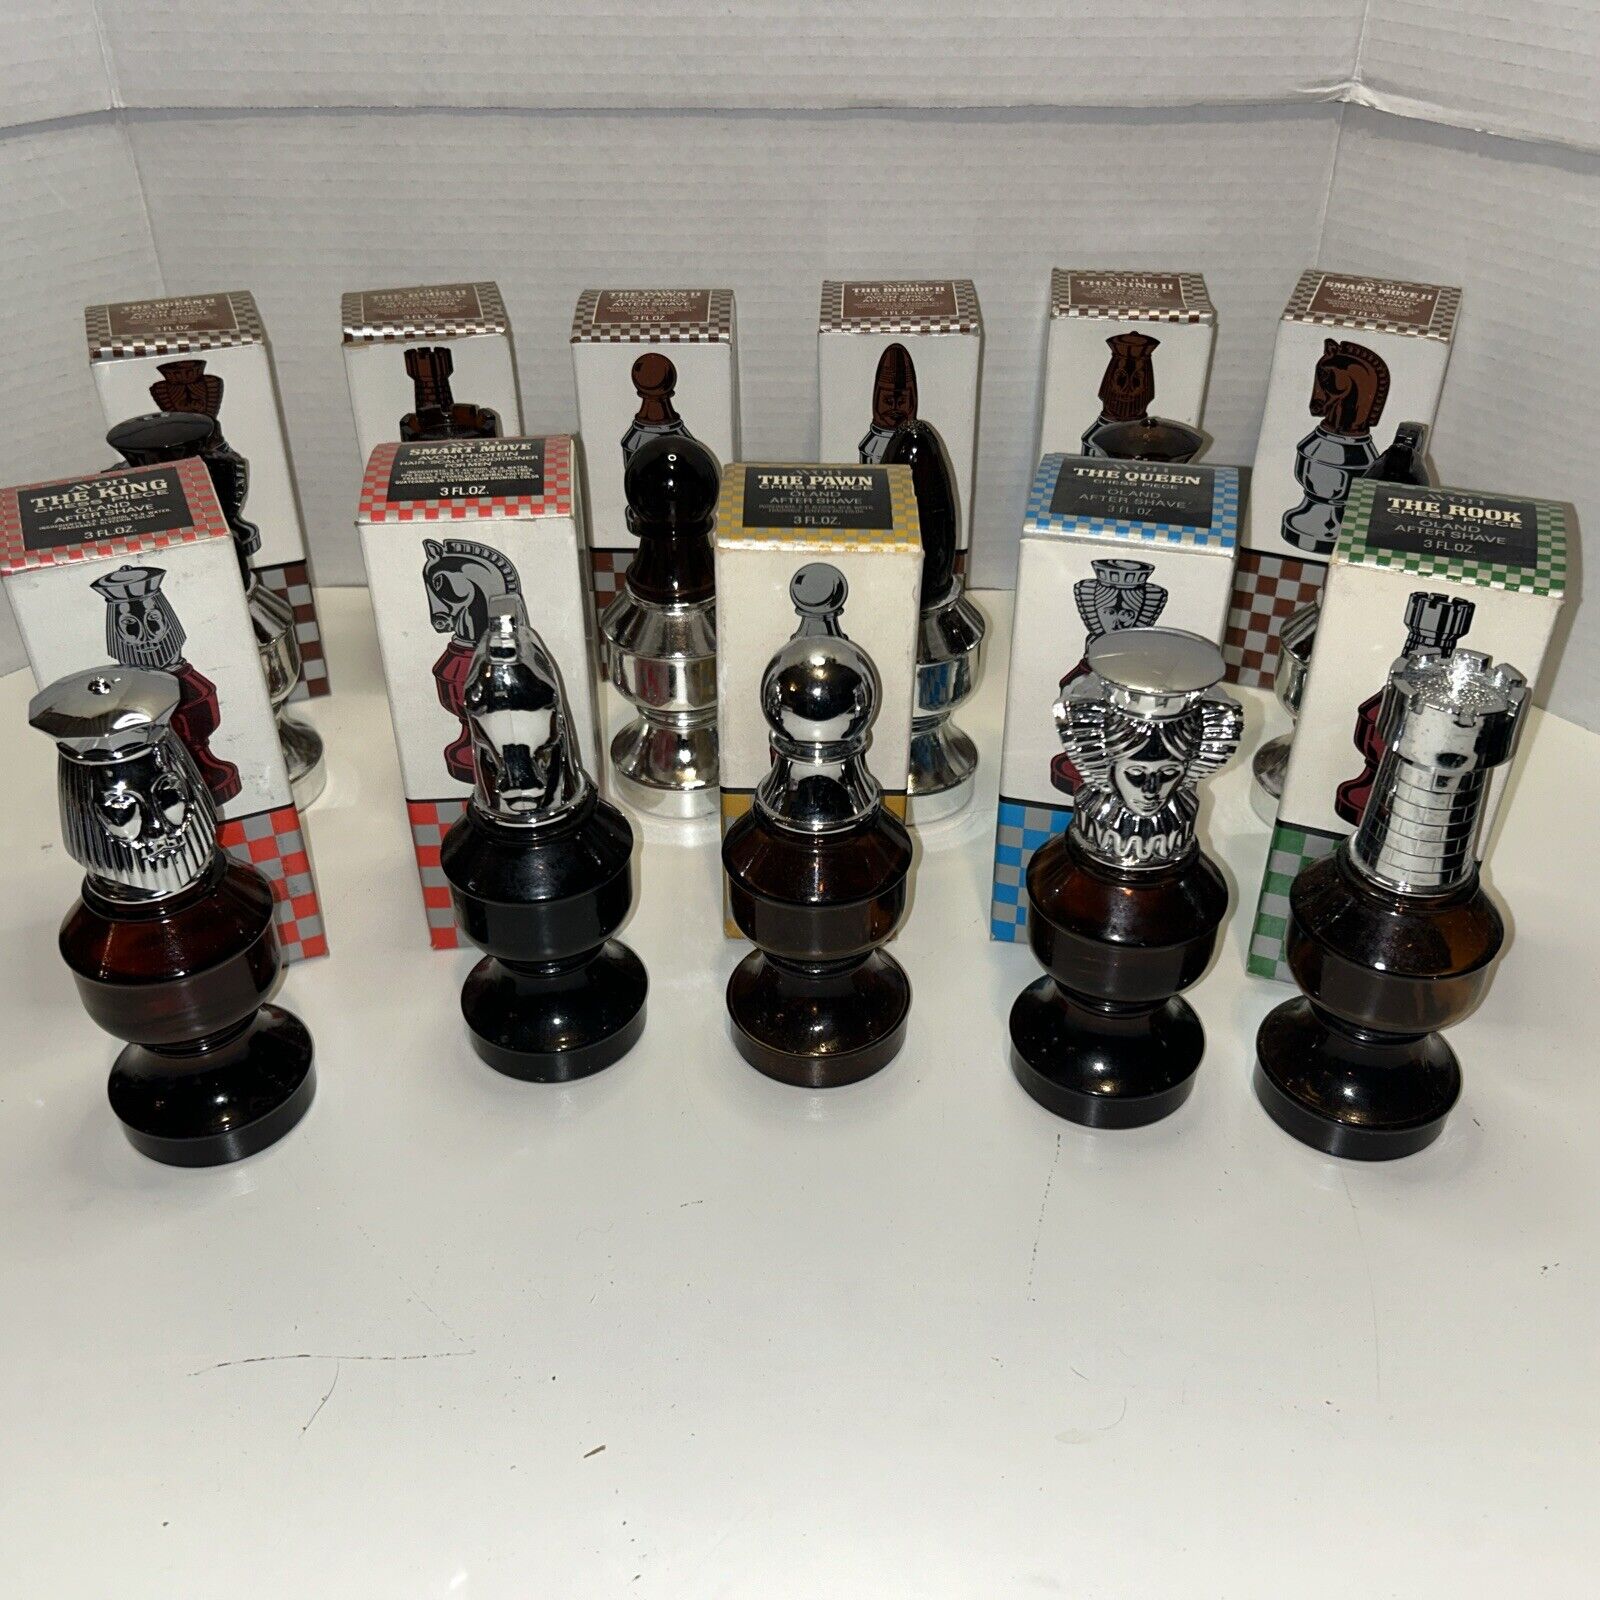 11 Vintage NOS AVON Chess Pieces Mens Cologne After Shave Bottles Replacements